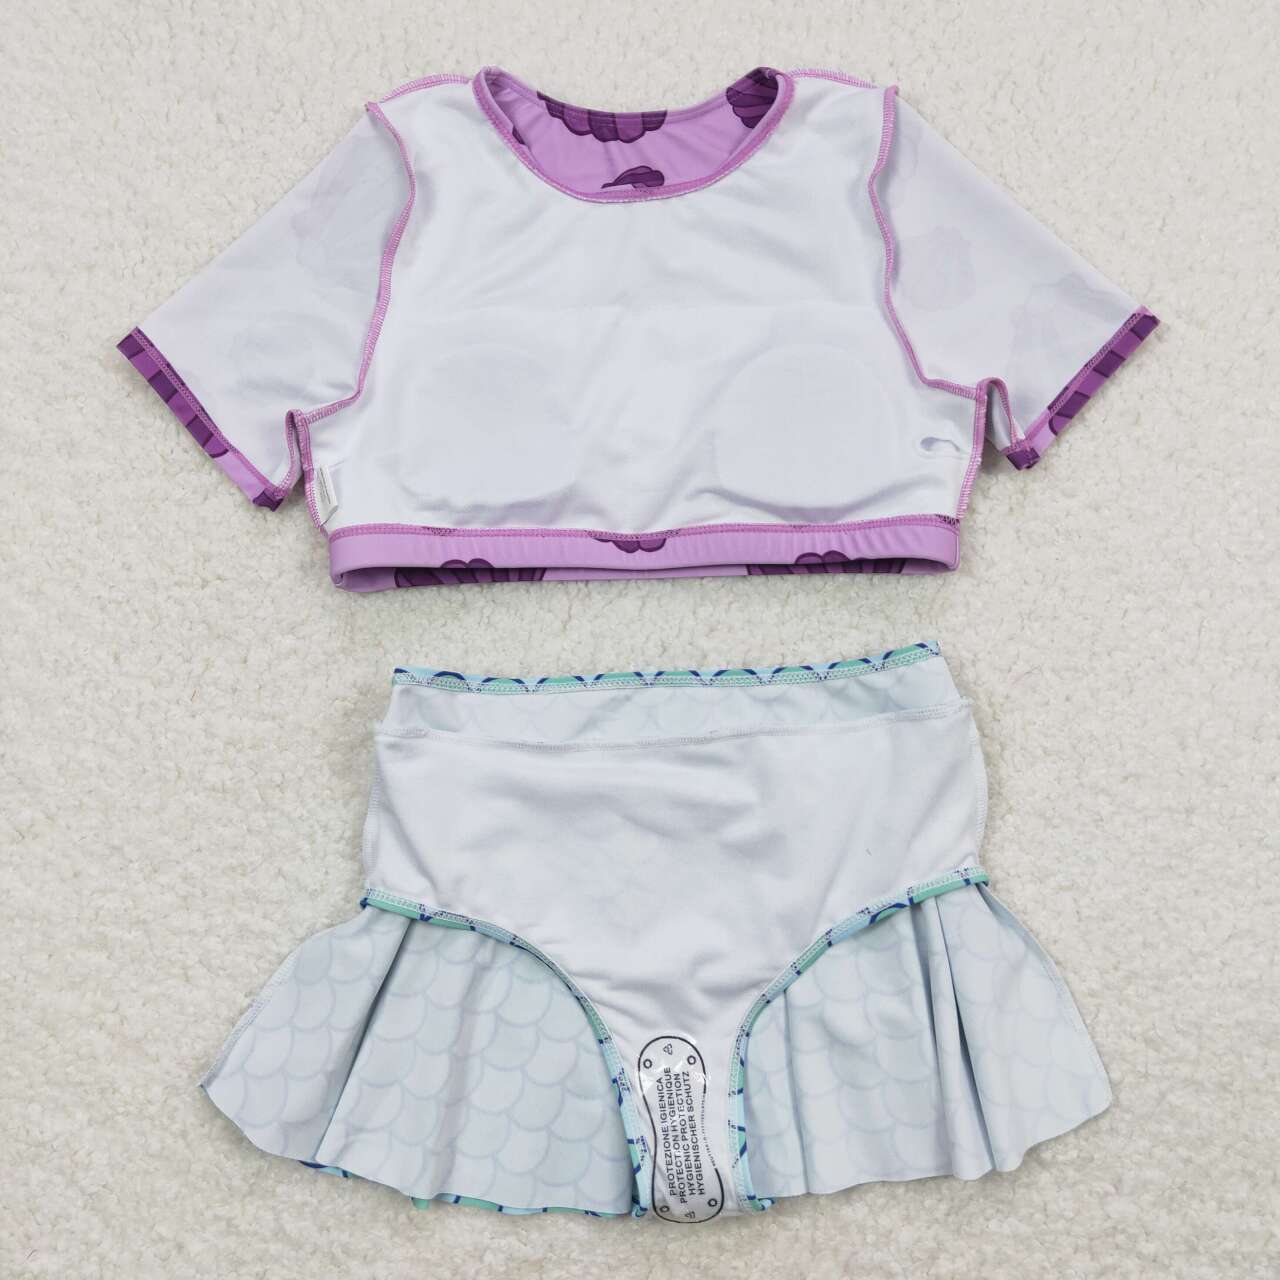 S0222 Purple Shell Top Fish Scale Bottom Girls 2 Pieces Swimsuits